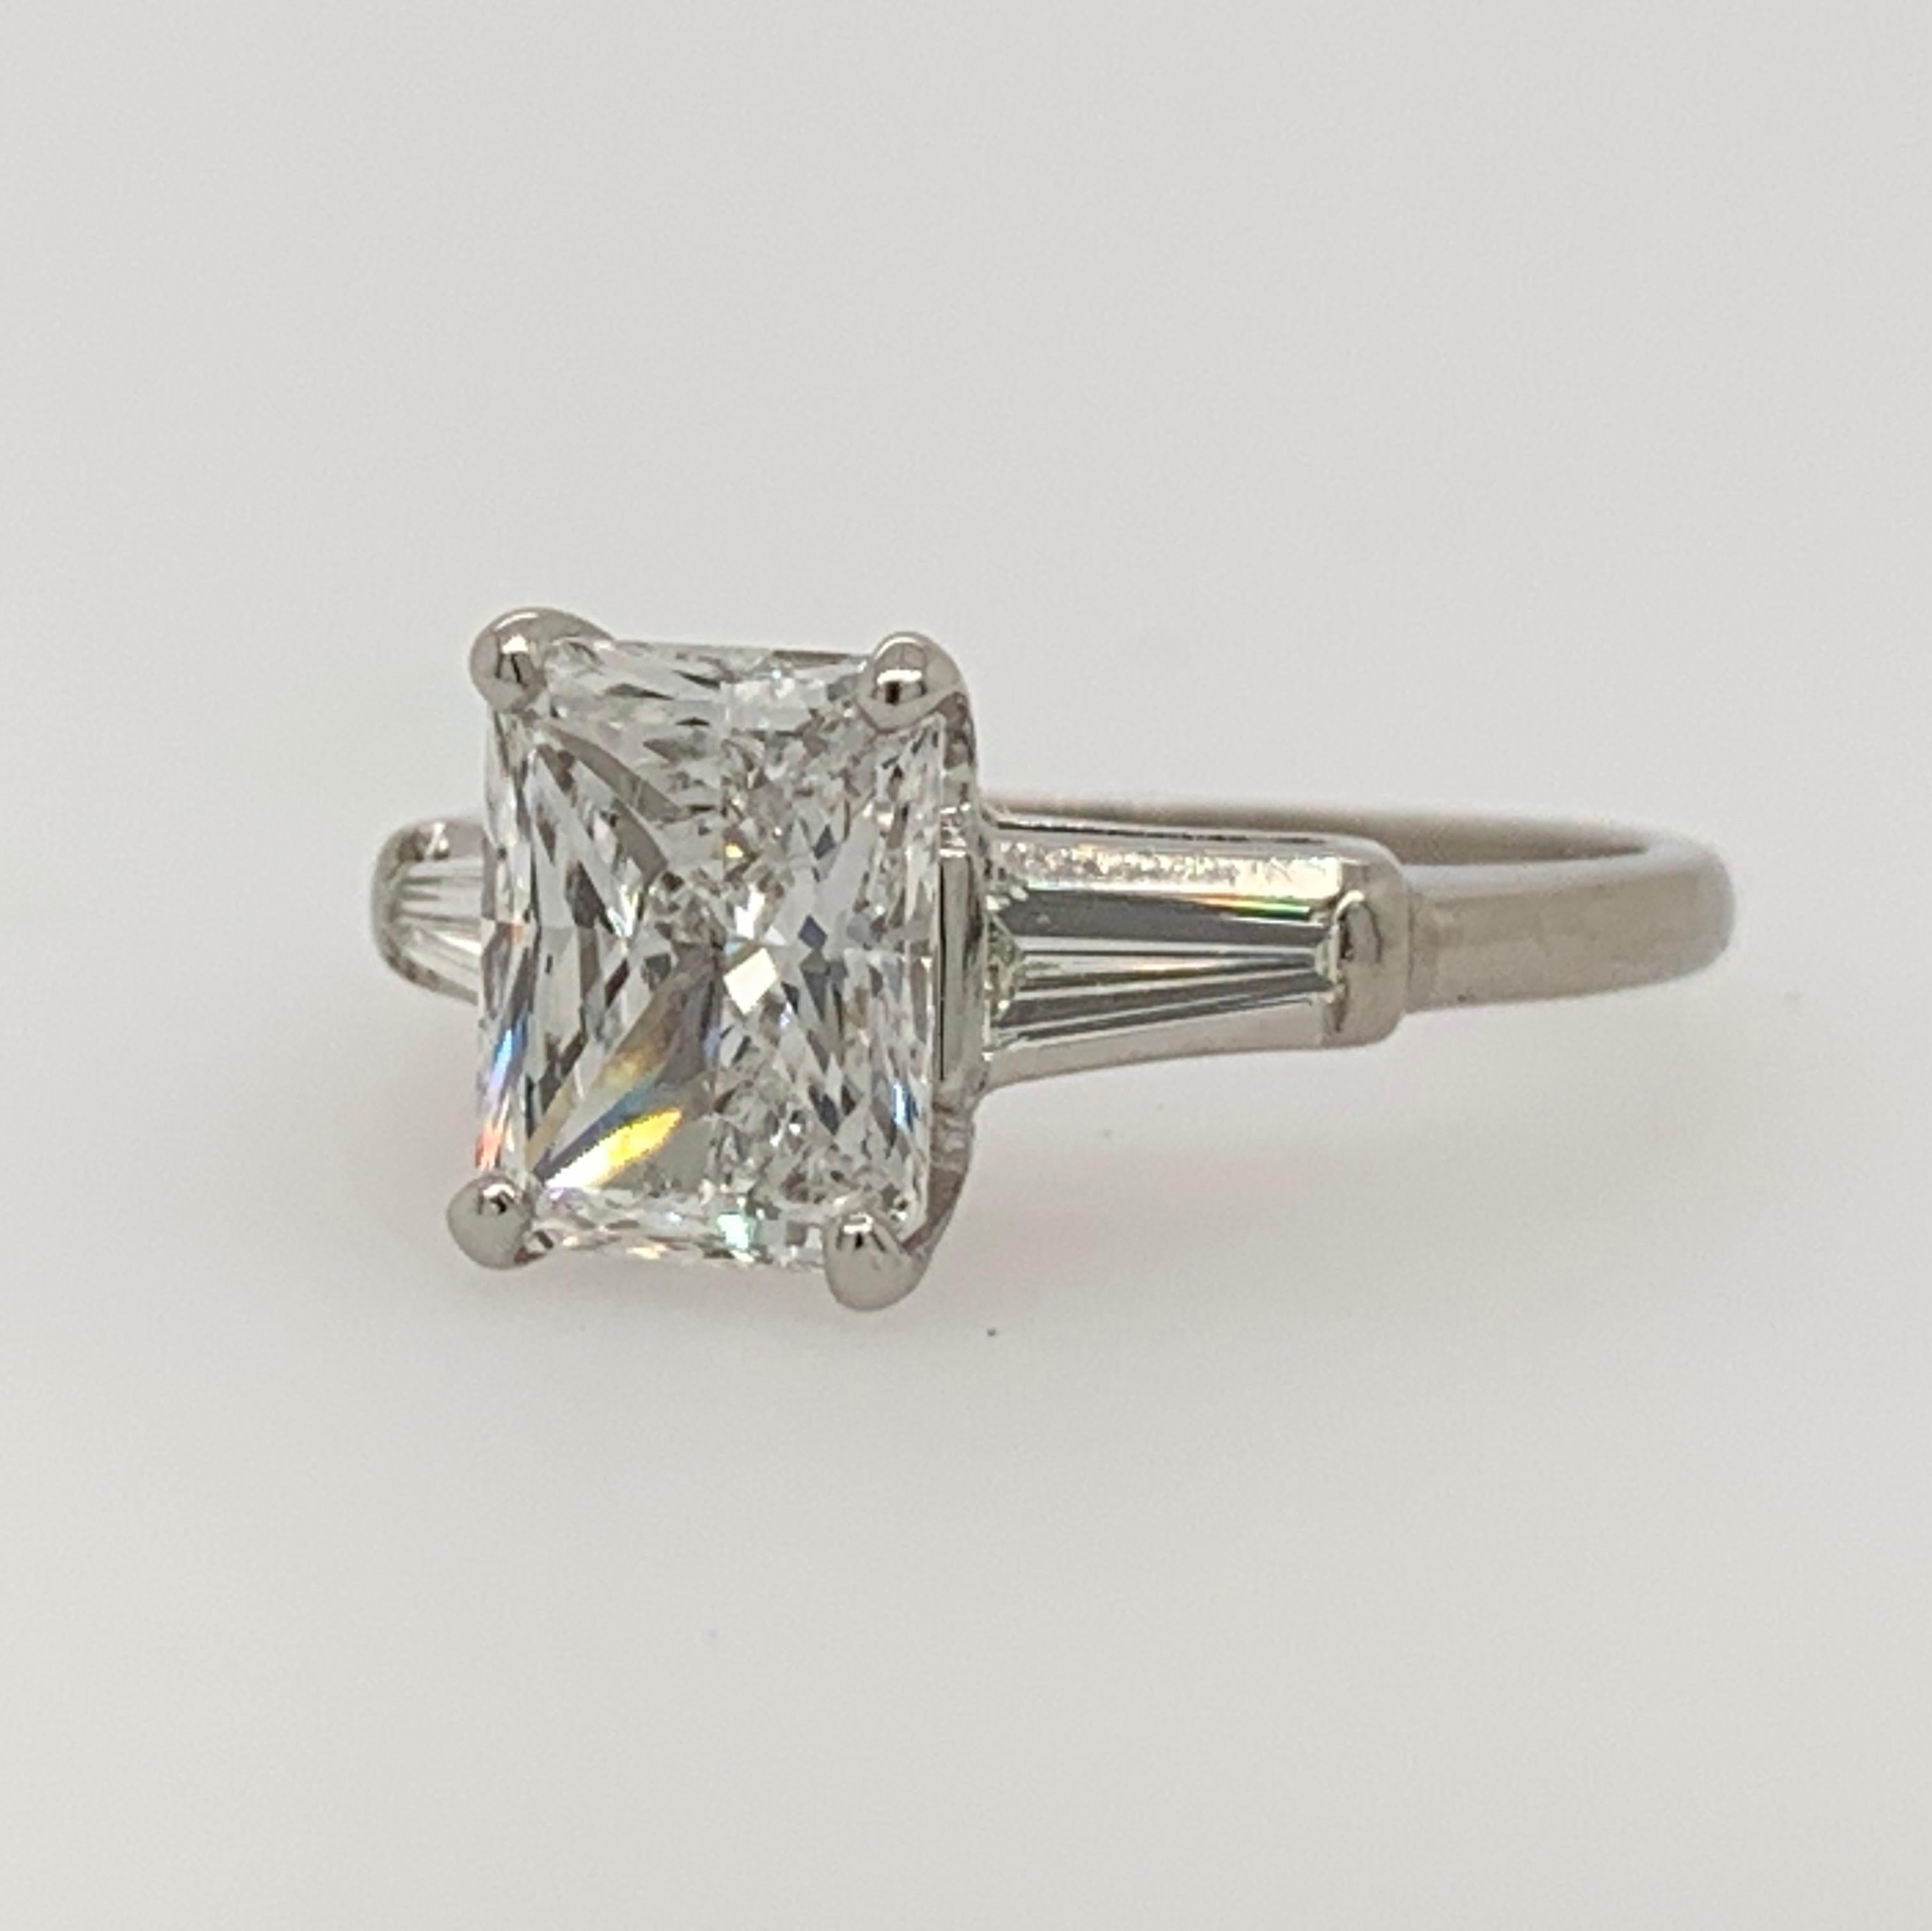 Platinum Ring Radiant cut 2ct total weight. The centerstone is 1.80 carats , D in color and SI2 in clarity by EGL USA. Measuring an impressive 8.43x6.67x3.89mm, it looks like a larger stone. 

The tapered baguette sidestones are approximately 0.20